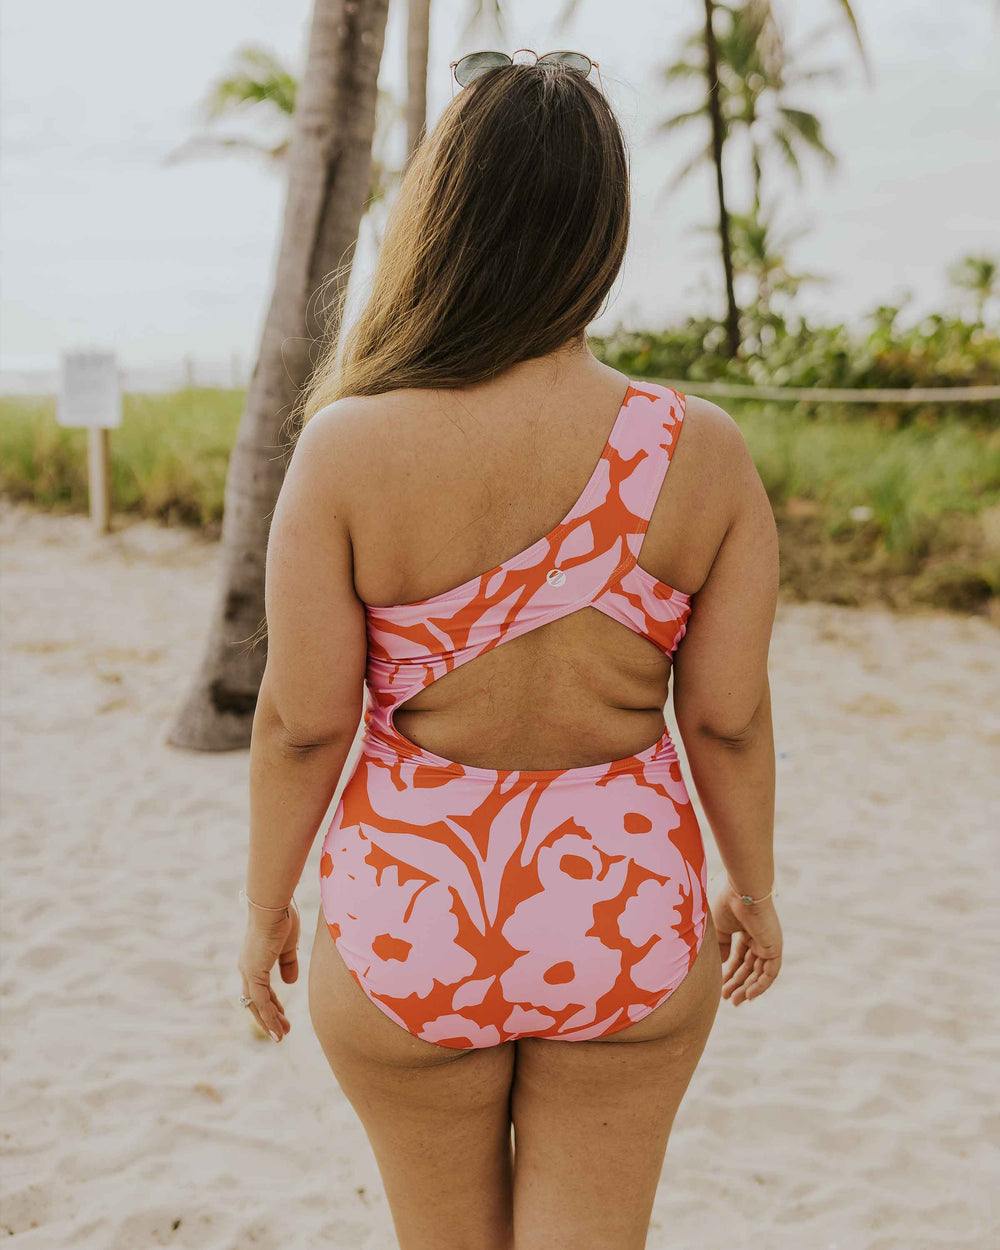 The back side of a pink and red floral swimsuit.